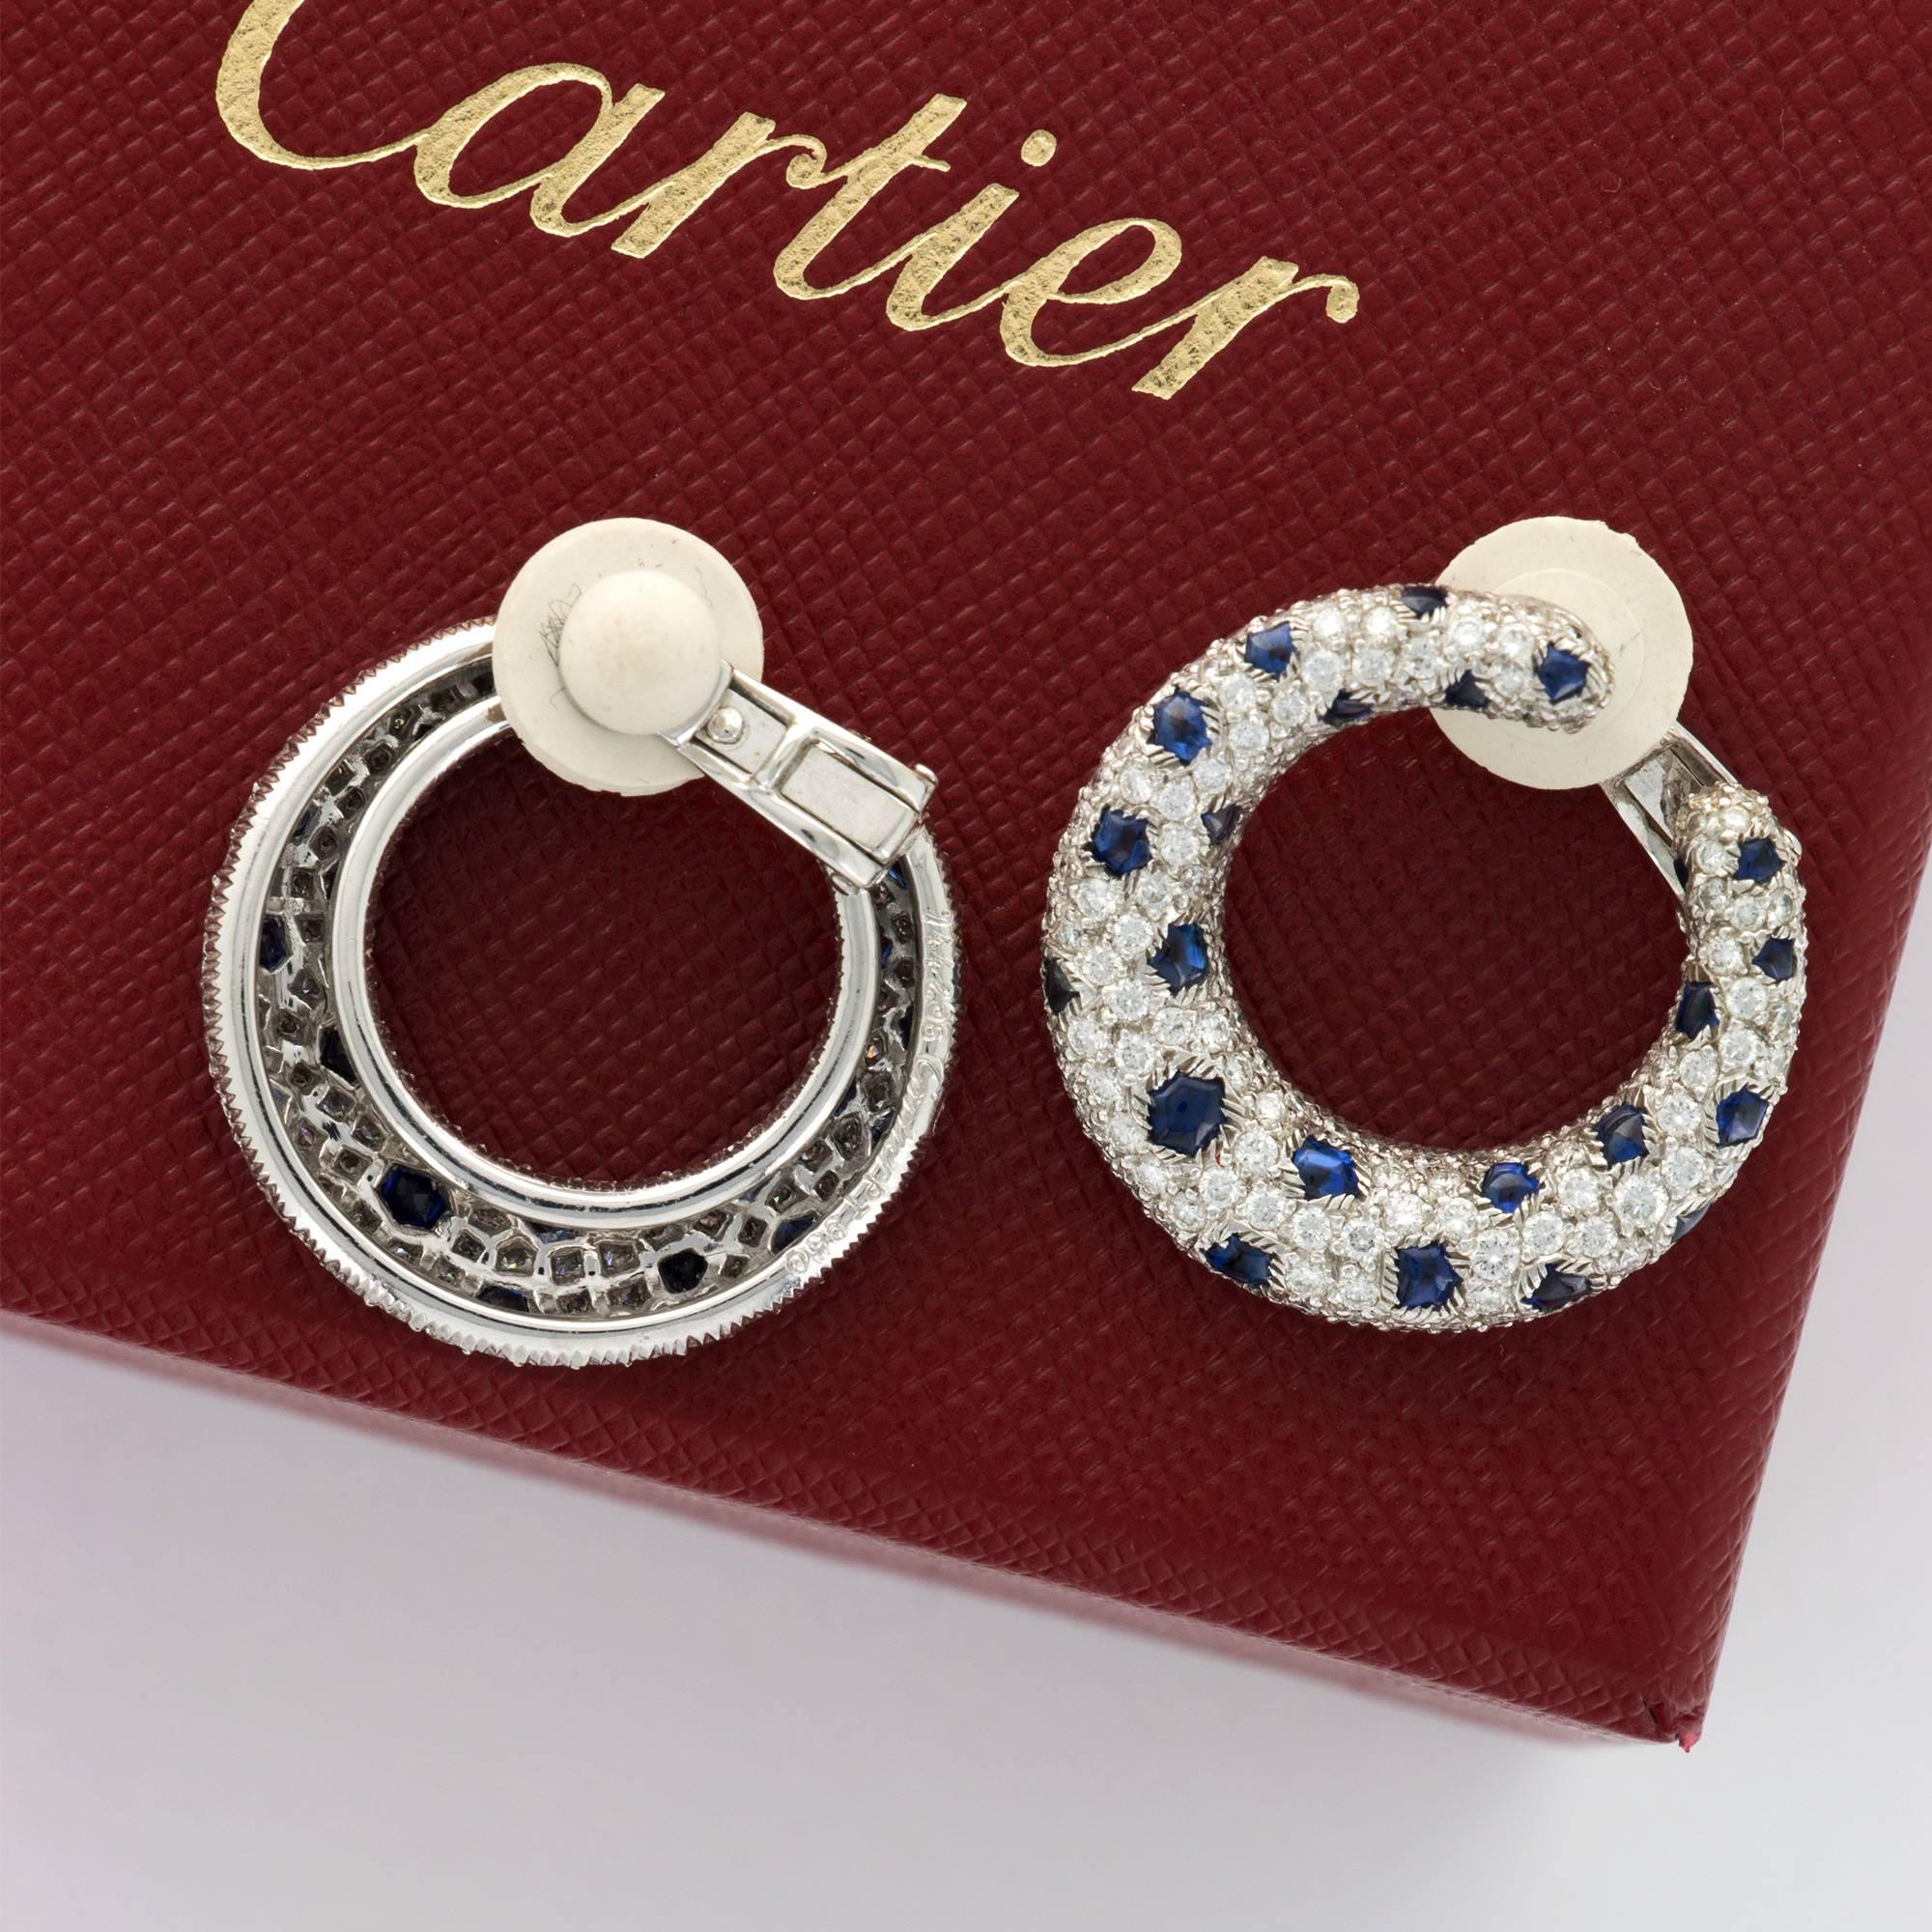 An Extraordinary Pair of "Panthere de Cartier" Earrings with Sapphire & Diamonds set in Platinum. Approximately 8.83 carats of diamonds and 4.00 Carats of Blue Sapphires. Earrings Weigh 22.4 grams. Signed Cartier.